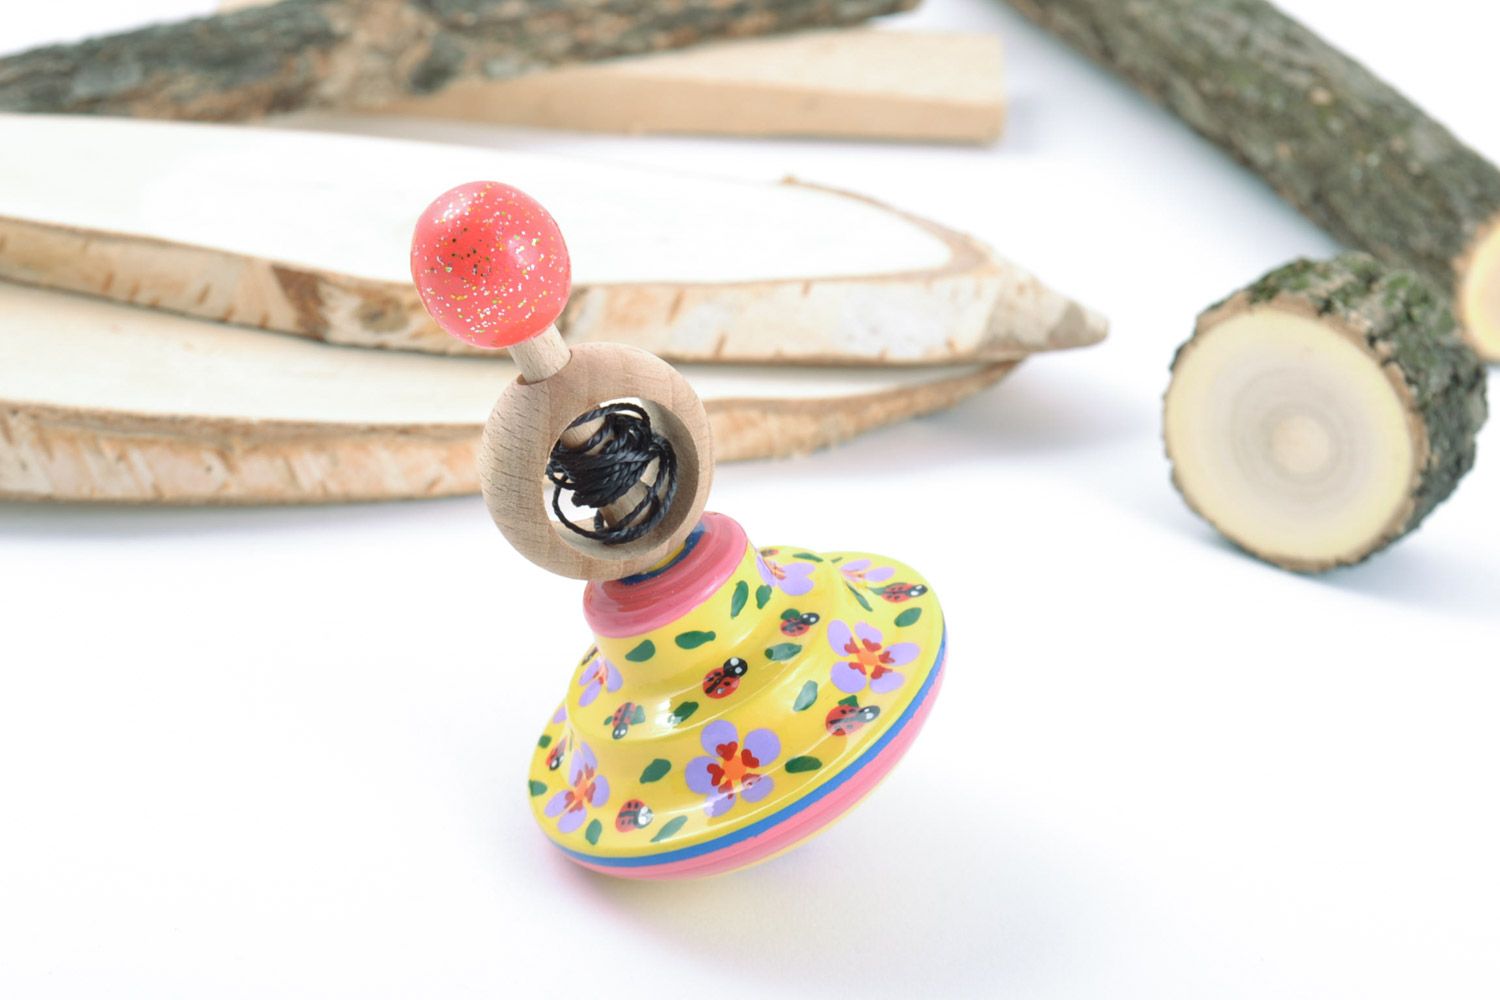 Handmade educational wooden eco toy spinning top painted in yellow color palette photo 1